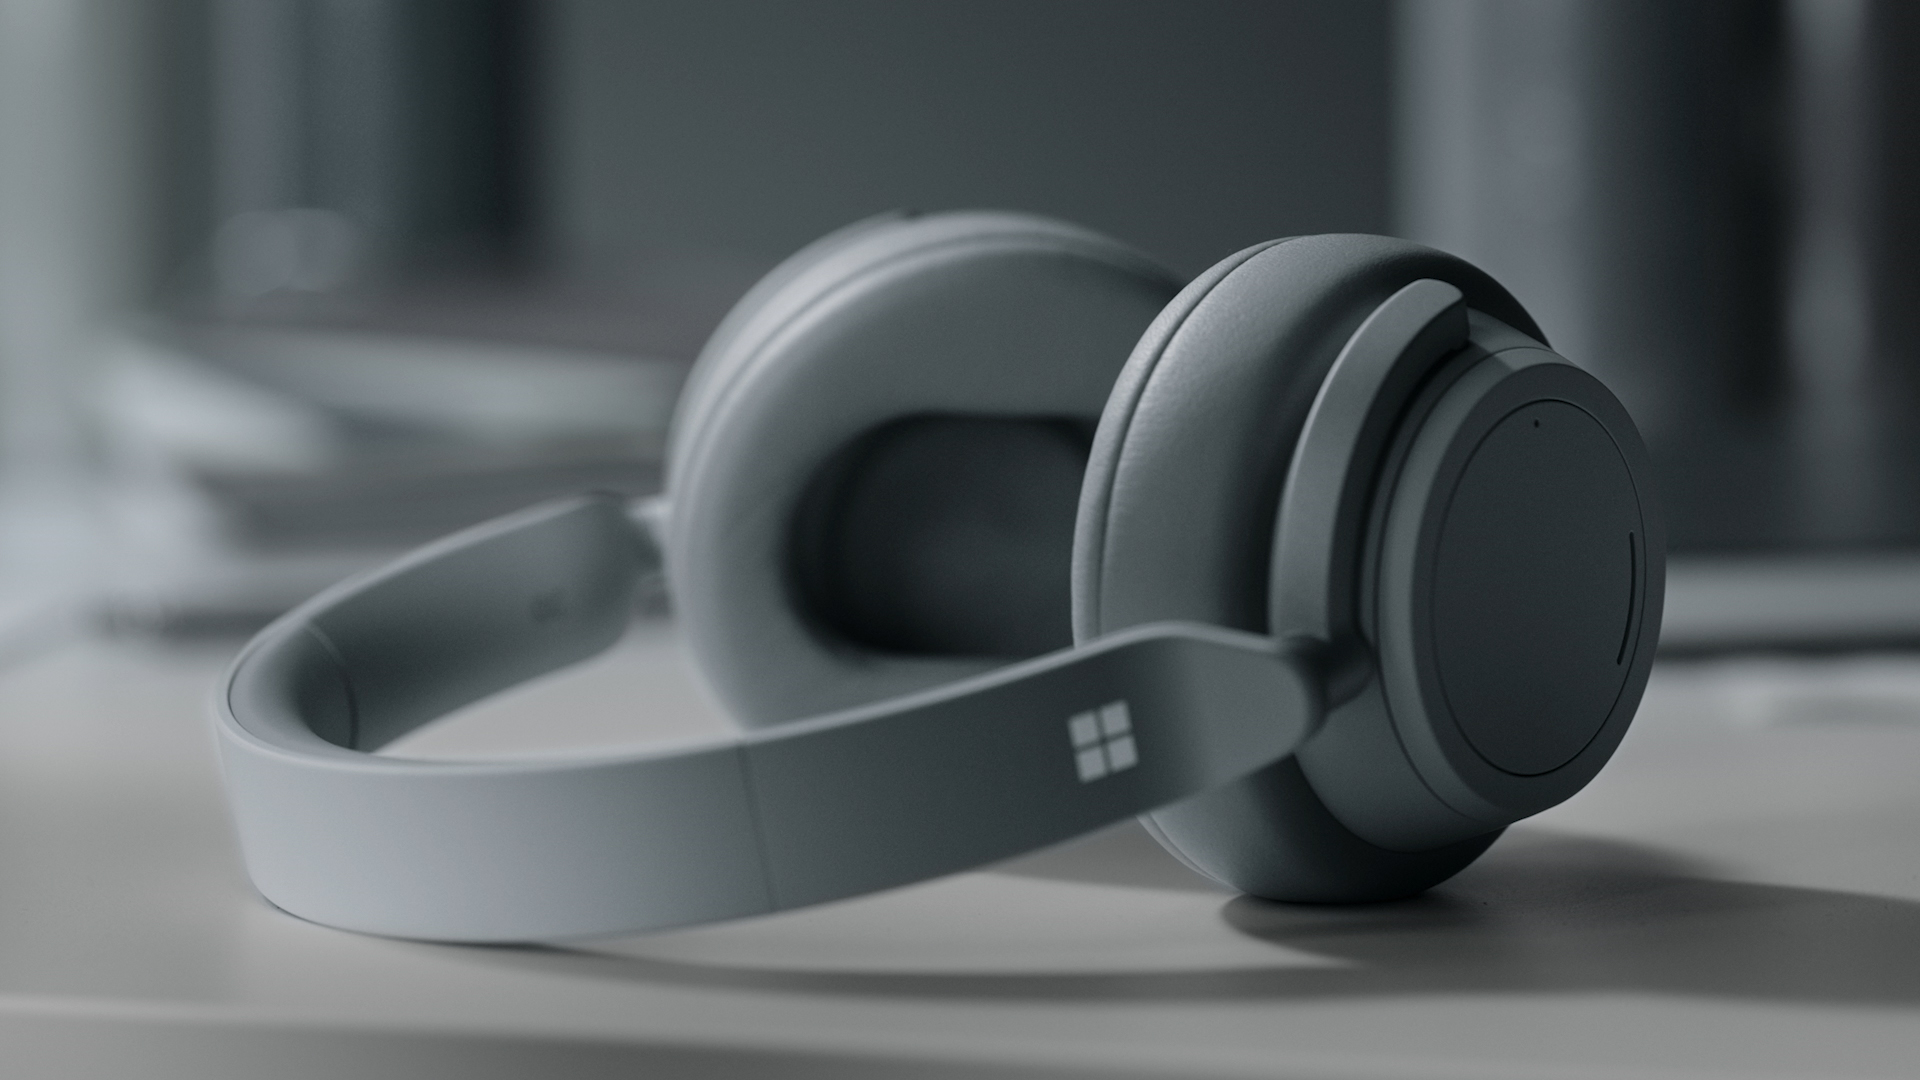 Meet The New Surface Headphones The Smarter Way To Listen Microsoft Surface